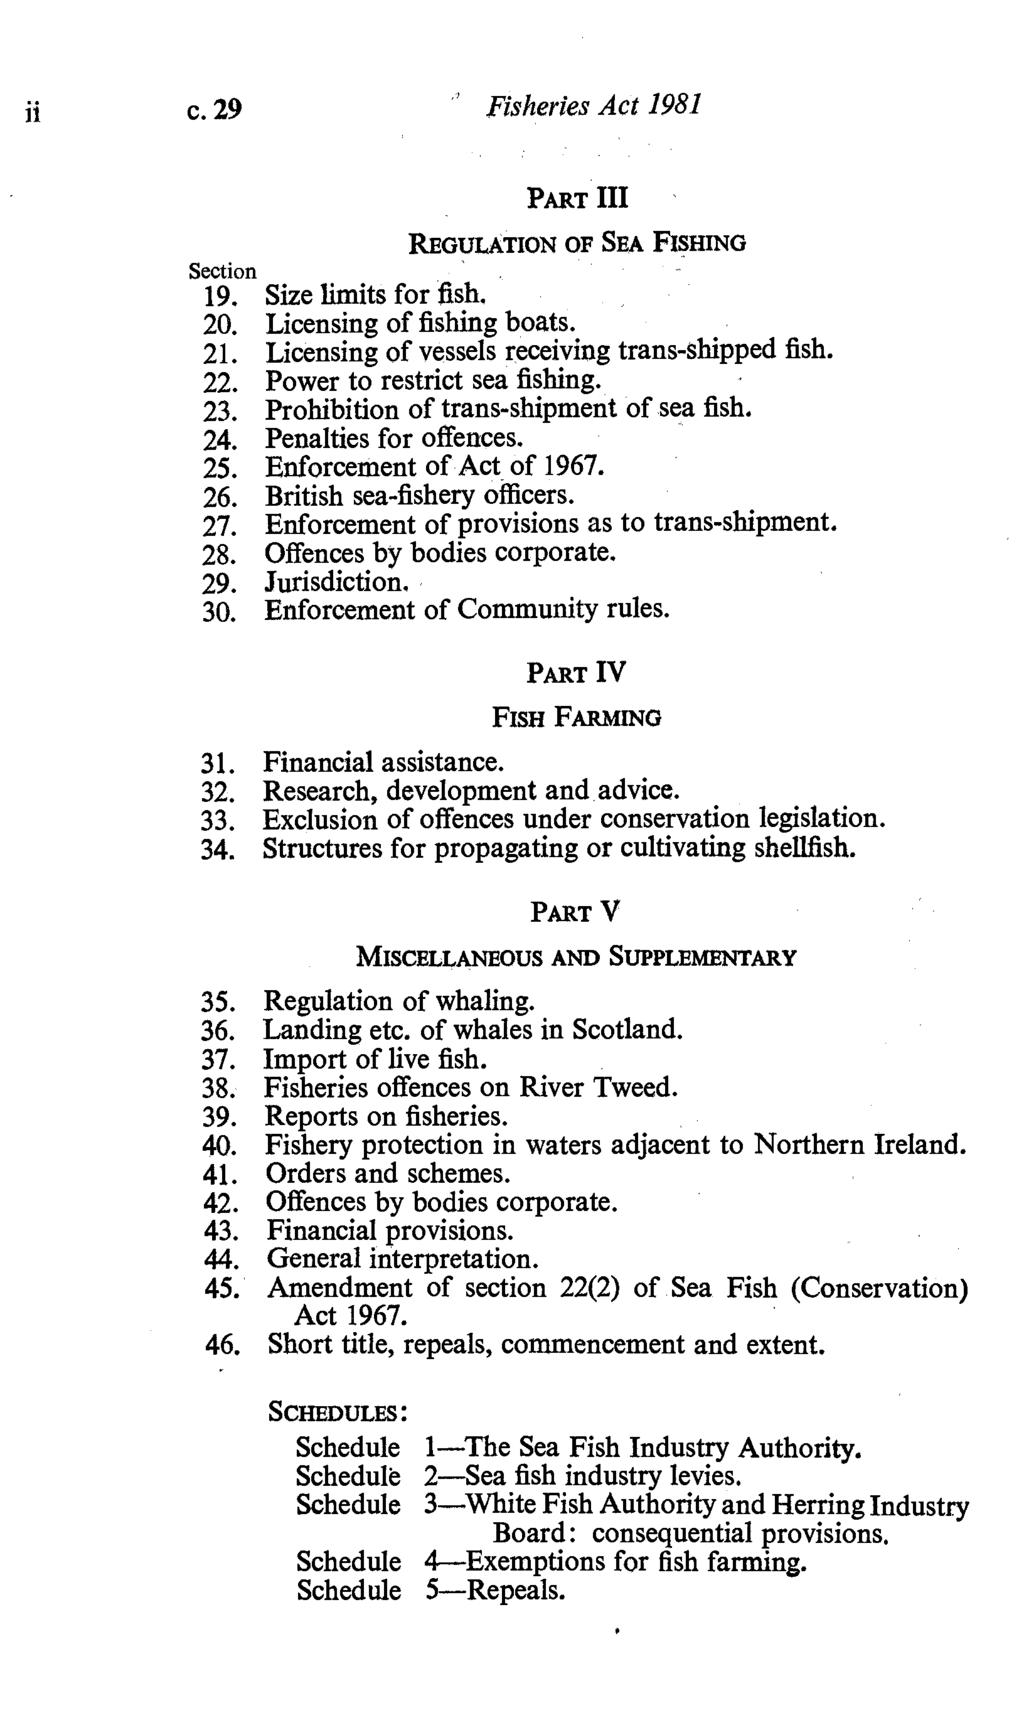 ii c. 29 Fisheries Act 1981 Section PART III REGULATION OF SEA FISHING 19. Size limits for fish. 20. Licensing of fishing boats. 21. Licensing of vessels receiving trans-shipped fish. 22.